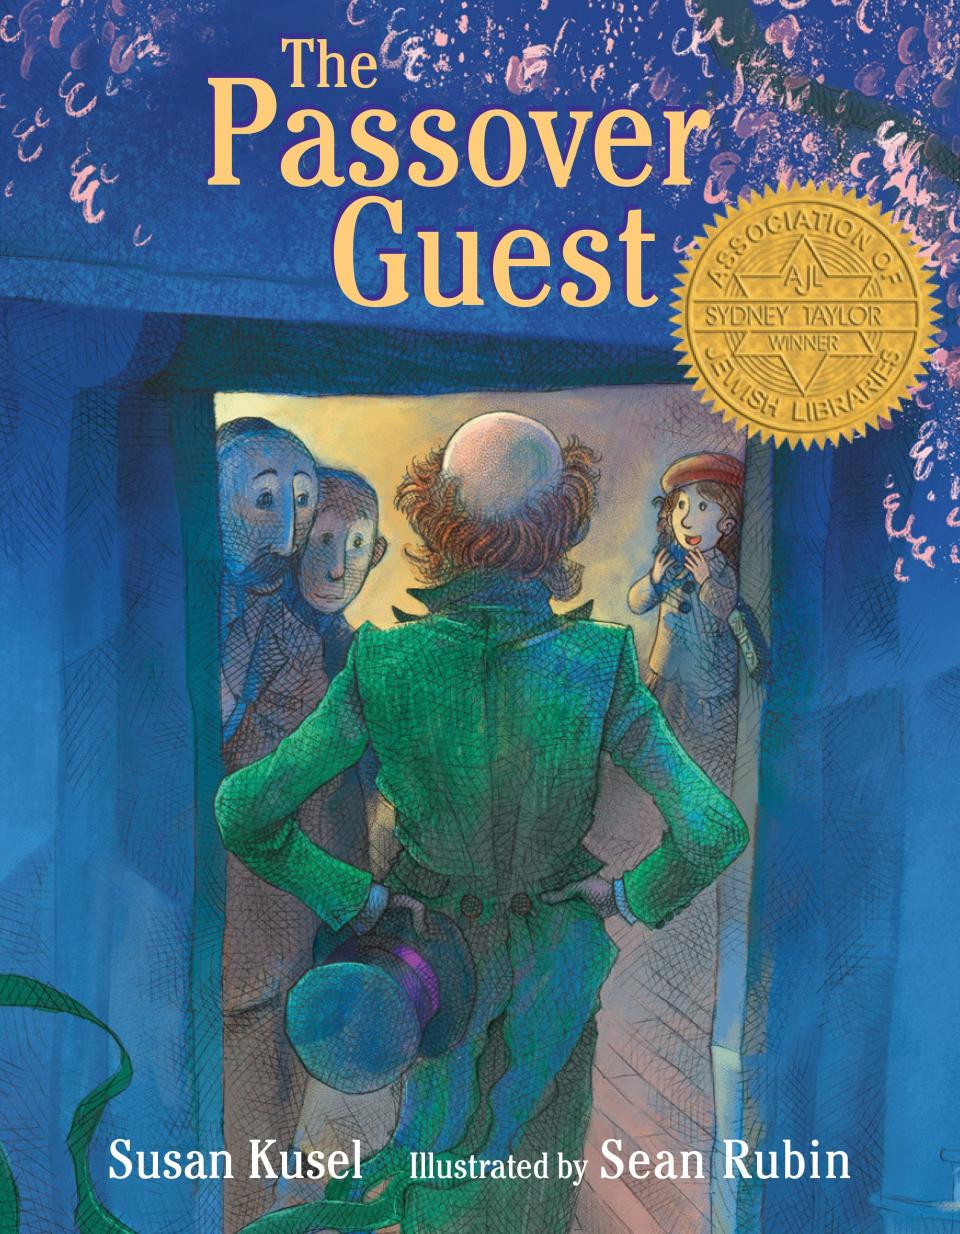 "The Passover Guest," a children's book by author Susan Kusel